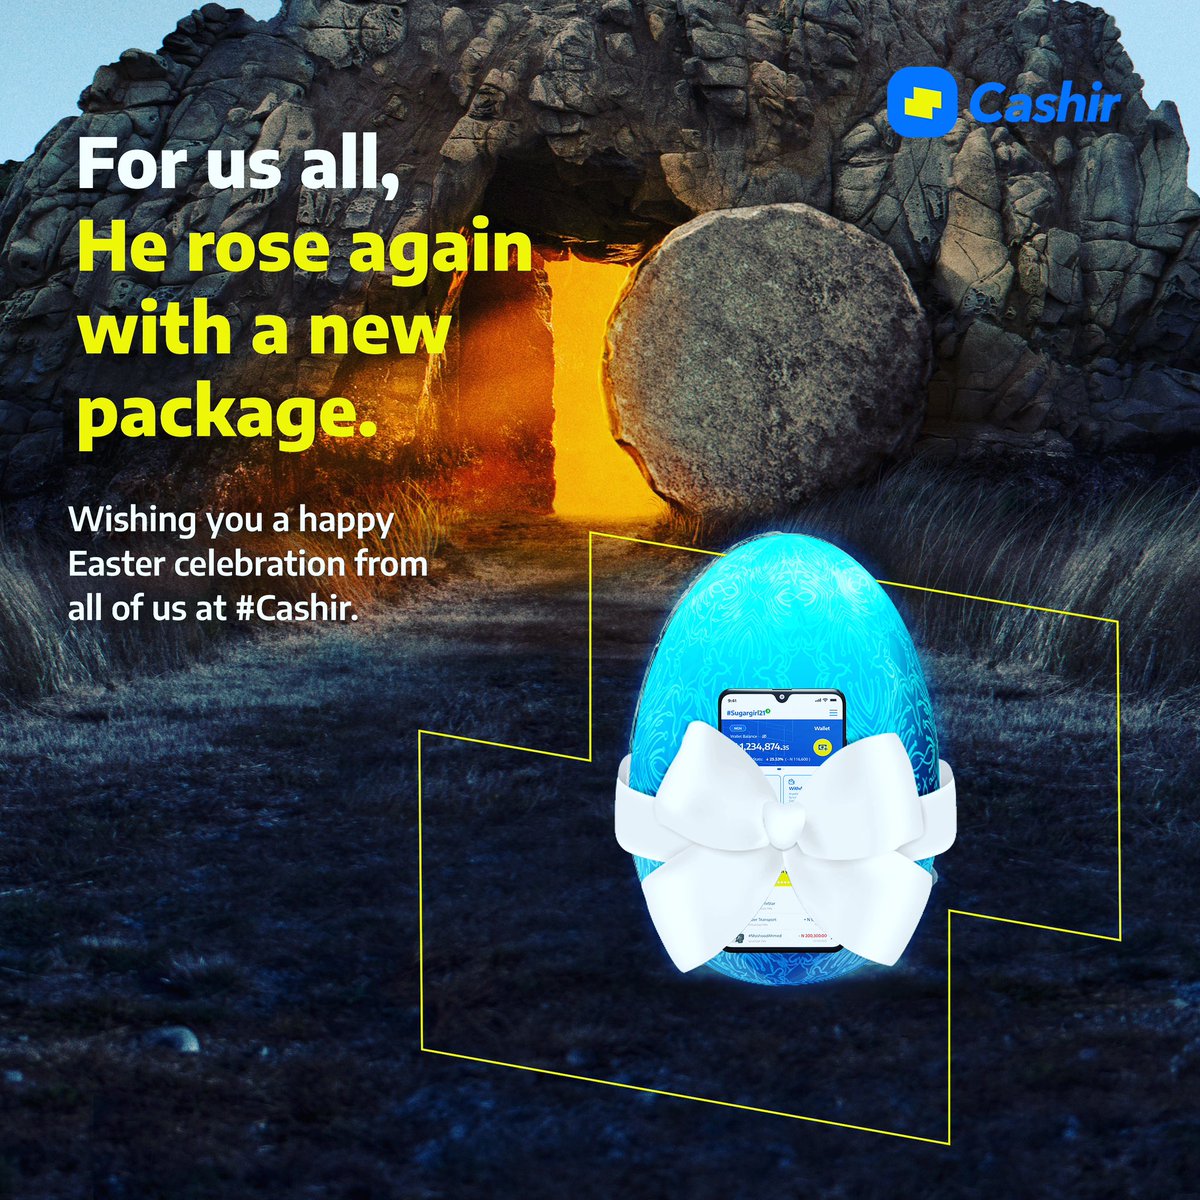 A gift for a gift. Happy Easter to you all 🐣
Regardless of how you celebrate Easter, we are always rooting for you! 

#cashir #bankingapp #momo #cash #finance #easter #celebration #fintech #cashirapp